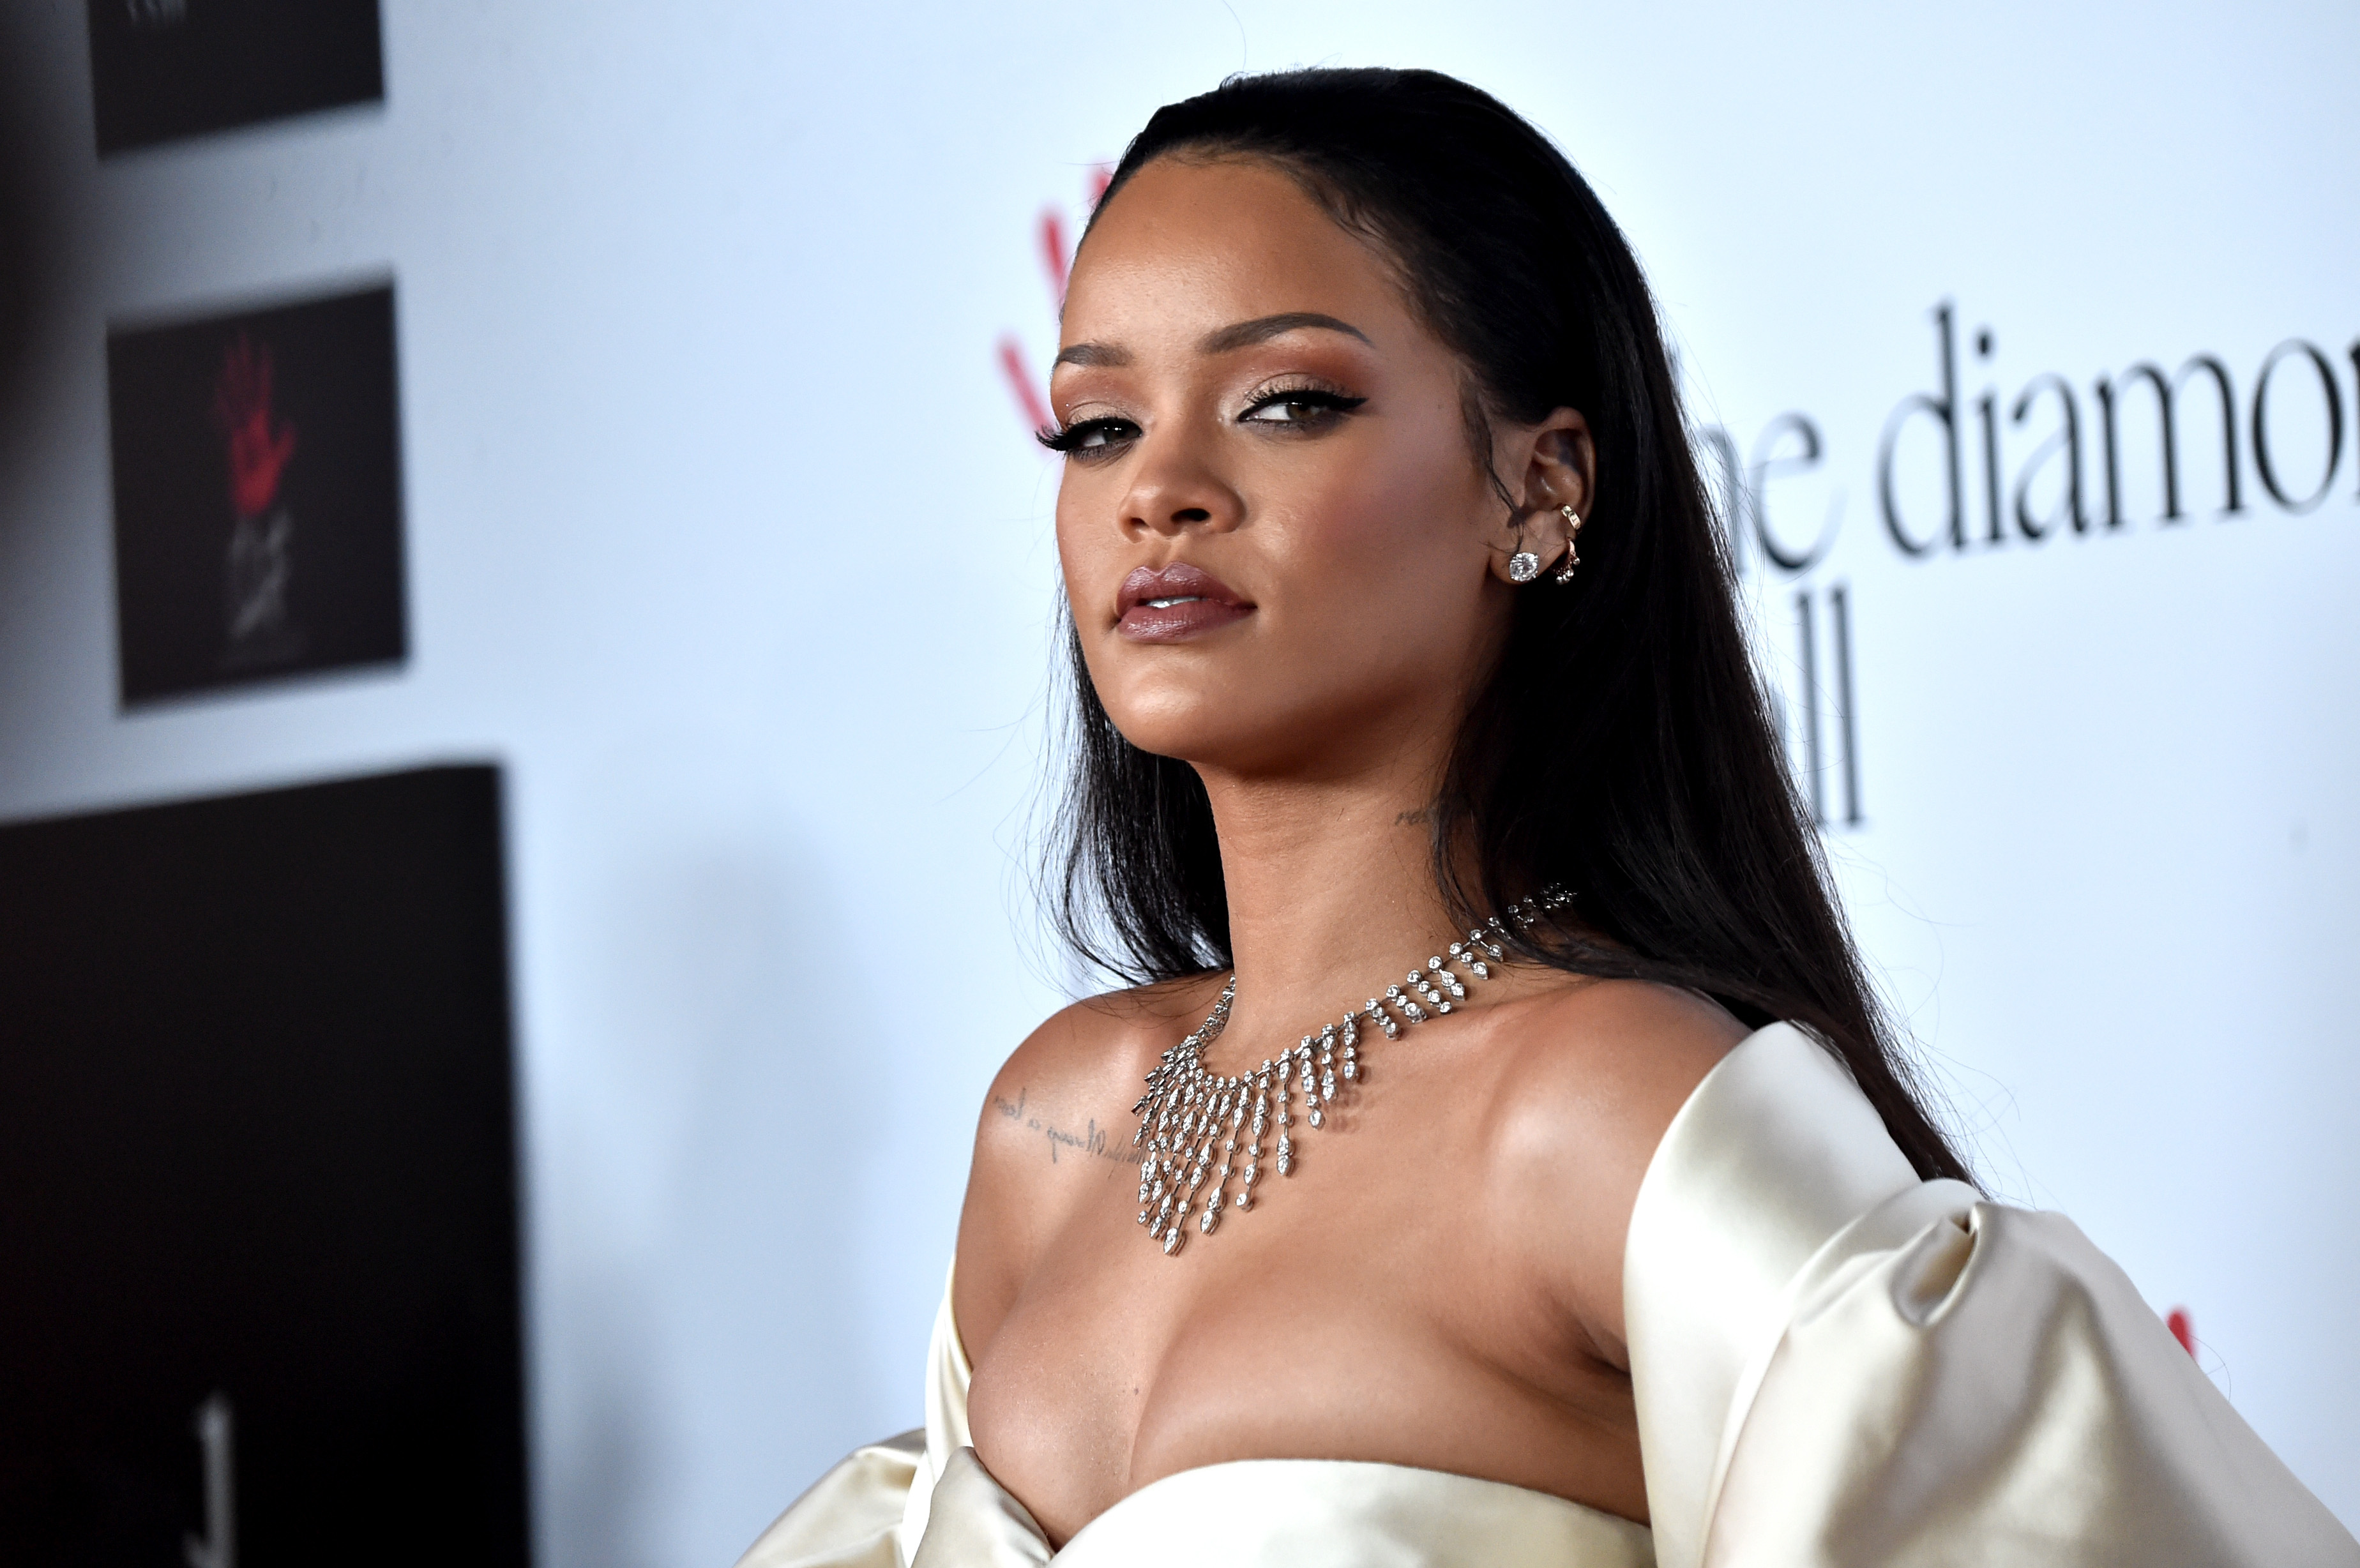 SANTA MONICA, CA - DECEMBER 10: Recording artist Rihanna attends the 2nd Annual Diamond Ball hosted by Rihanna and The Clara Lionel Foundation at The Barker Hanger on December 10, 2015 in Santa Monica, California. (Photo by Alberto E. Rodriguez/Getty Images)